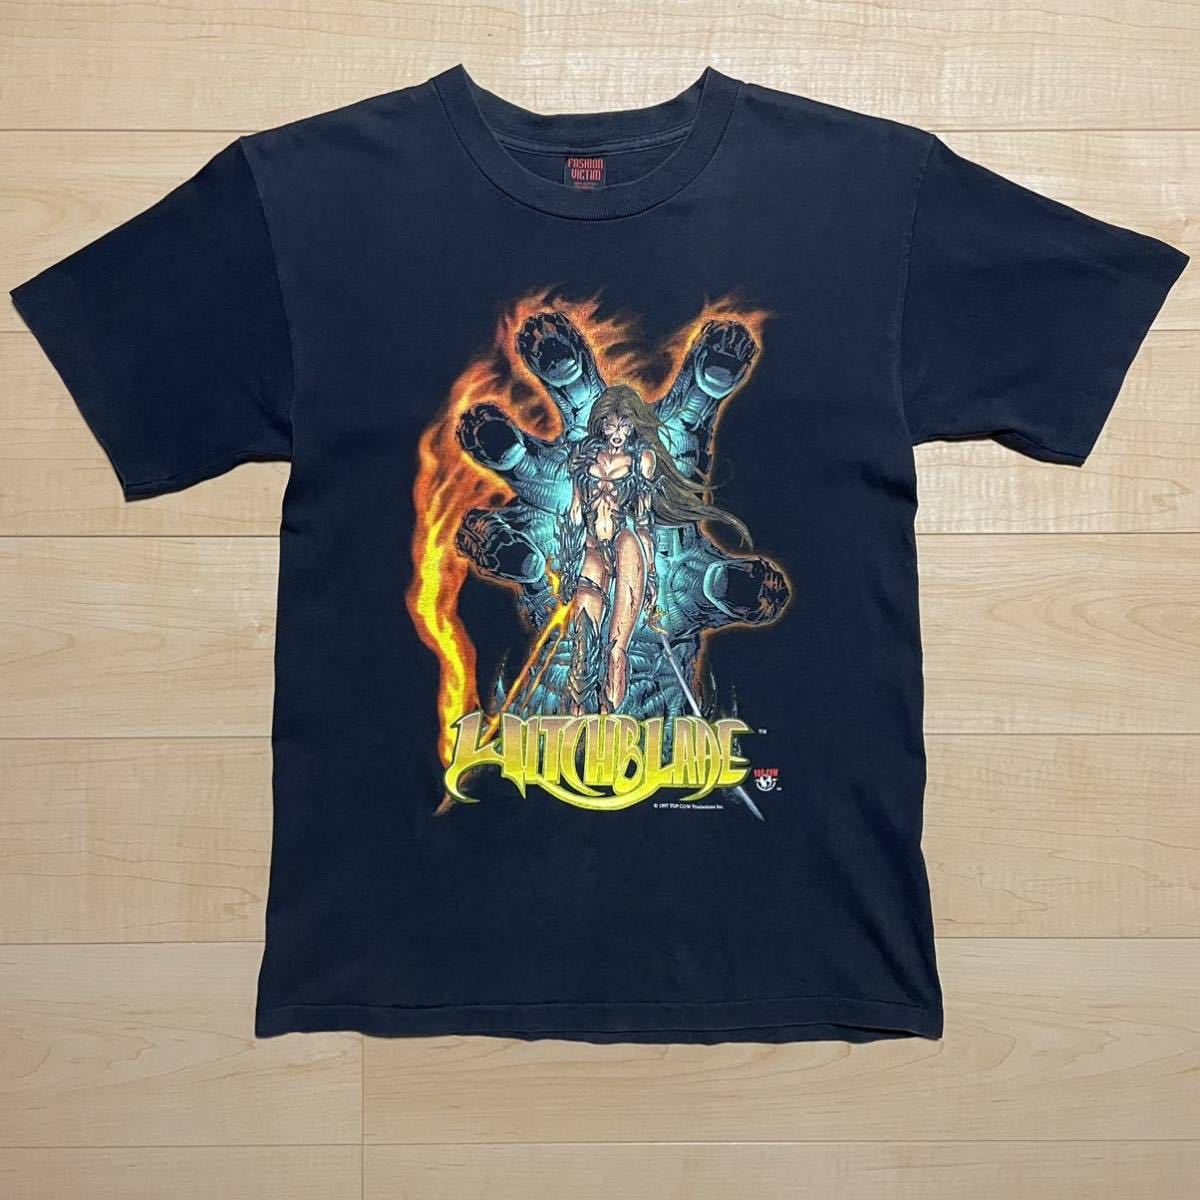 SALE／87%OFF】 90s FASHION VICTIM Witch Blade Tシャツ アニメ